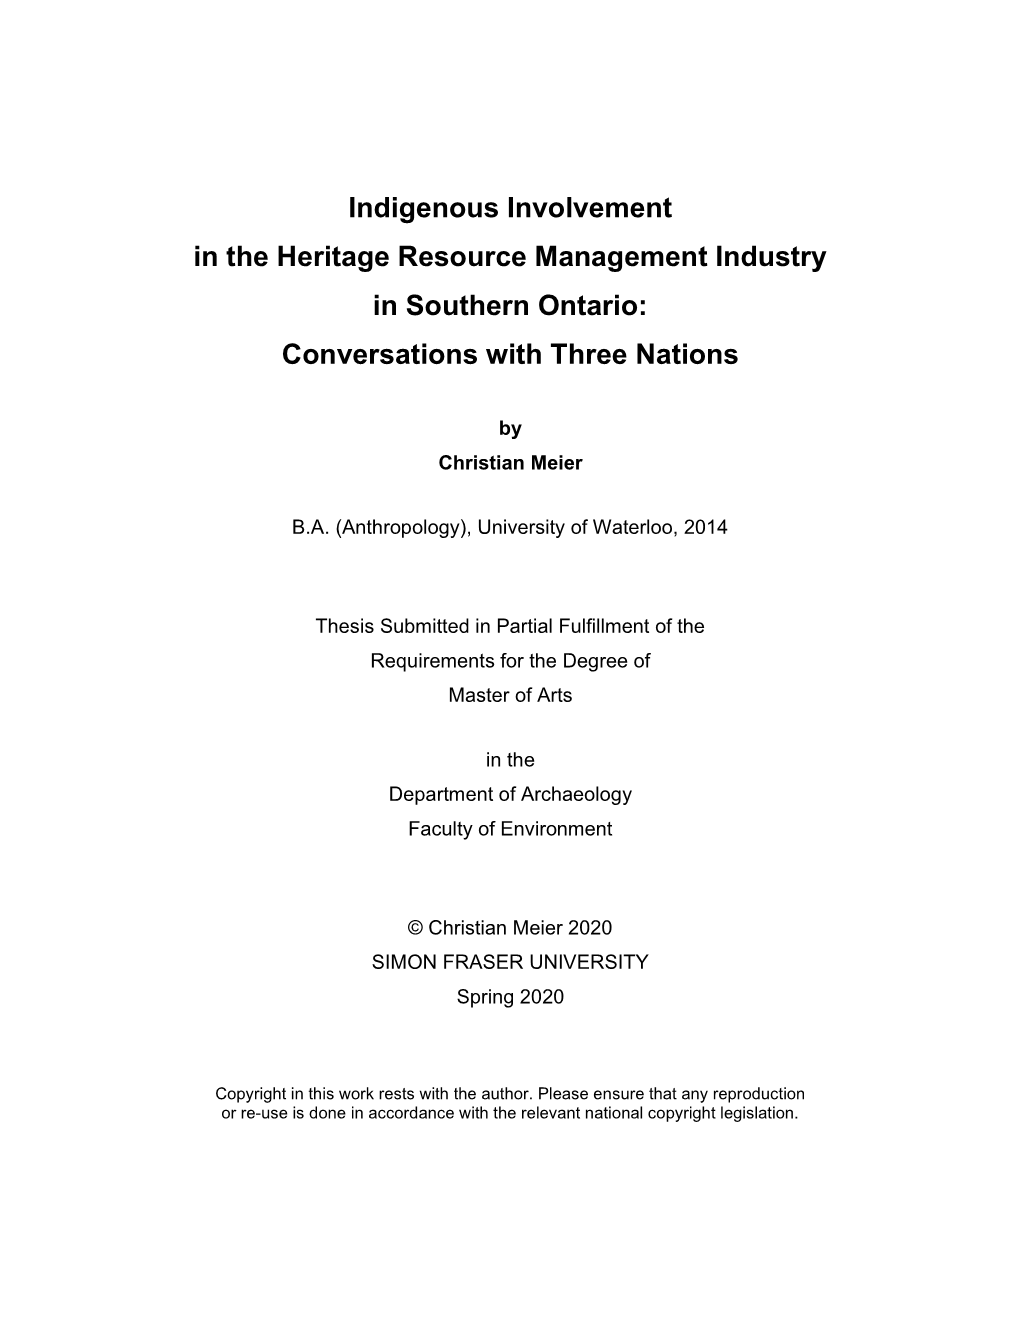 Indigenous Involvement in the Heritage Resource Management Industry in Southern Ontario: Conversations with Three Nations